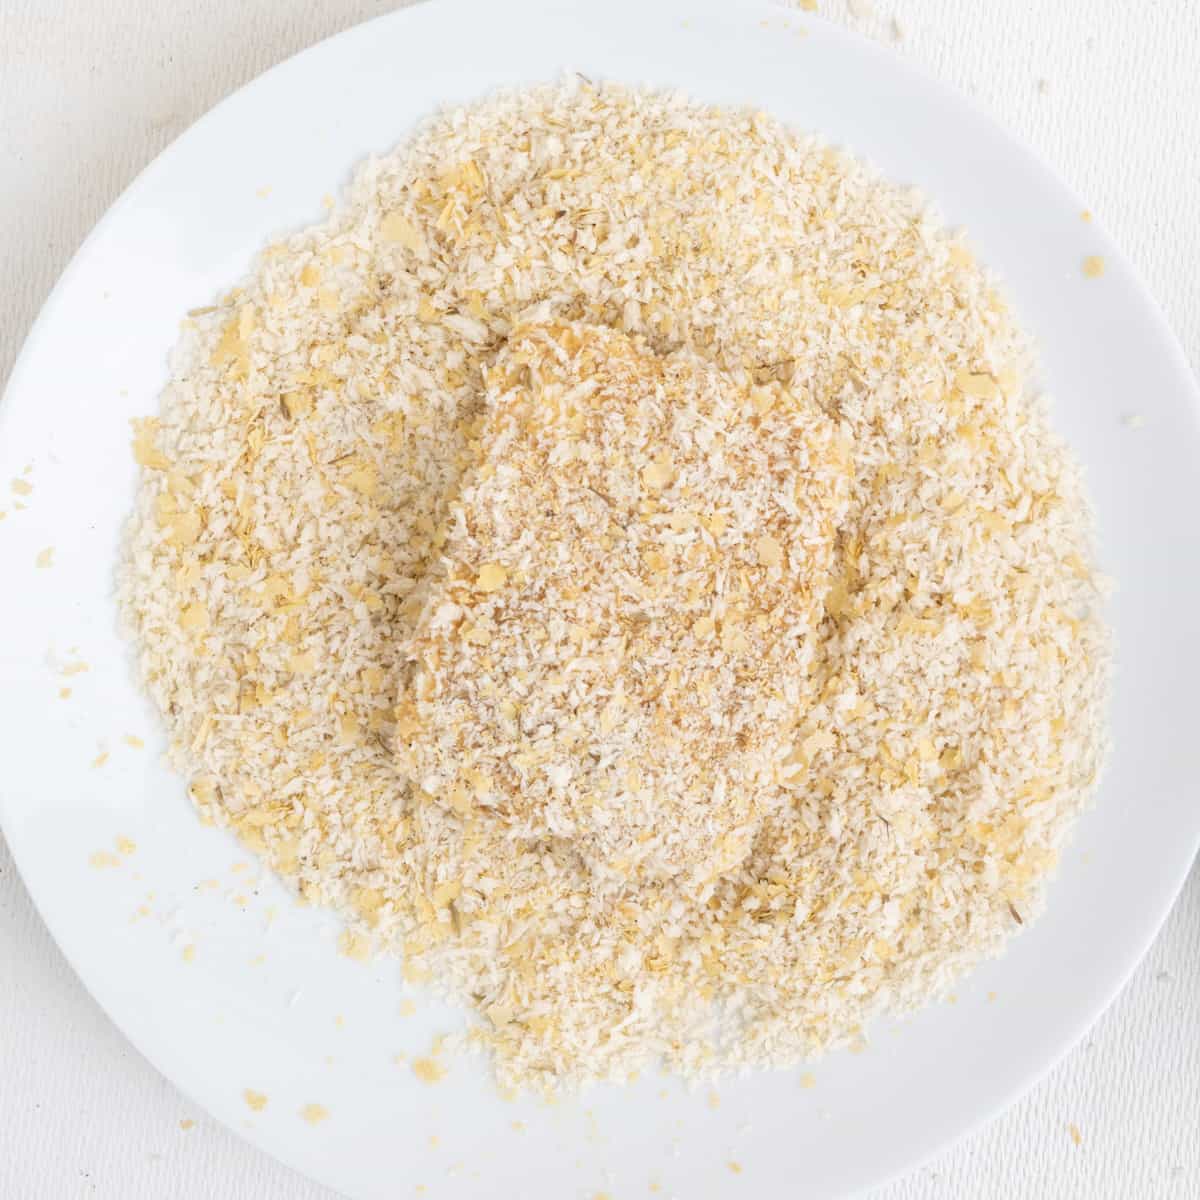 A recuangular slice of tofu completely covered in breadcrumbs.